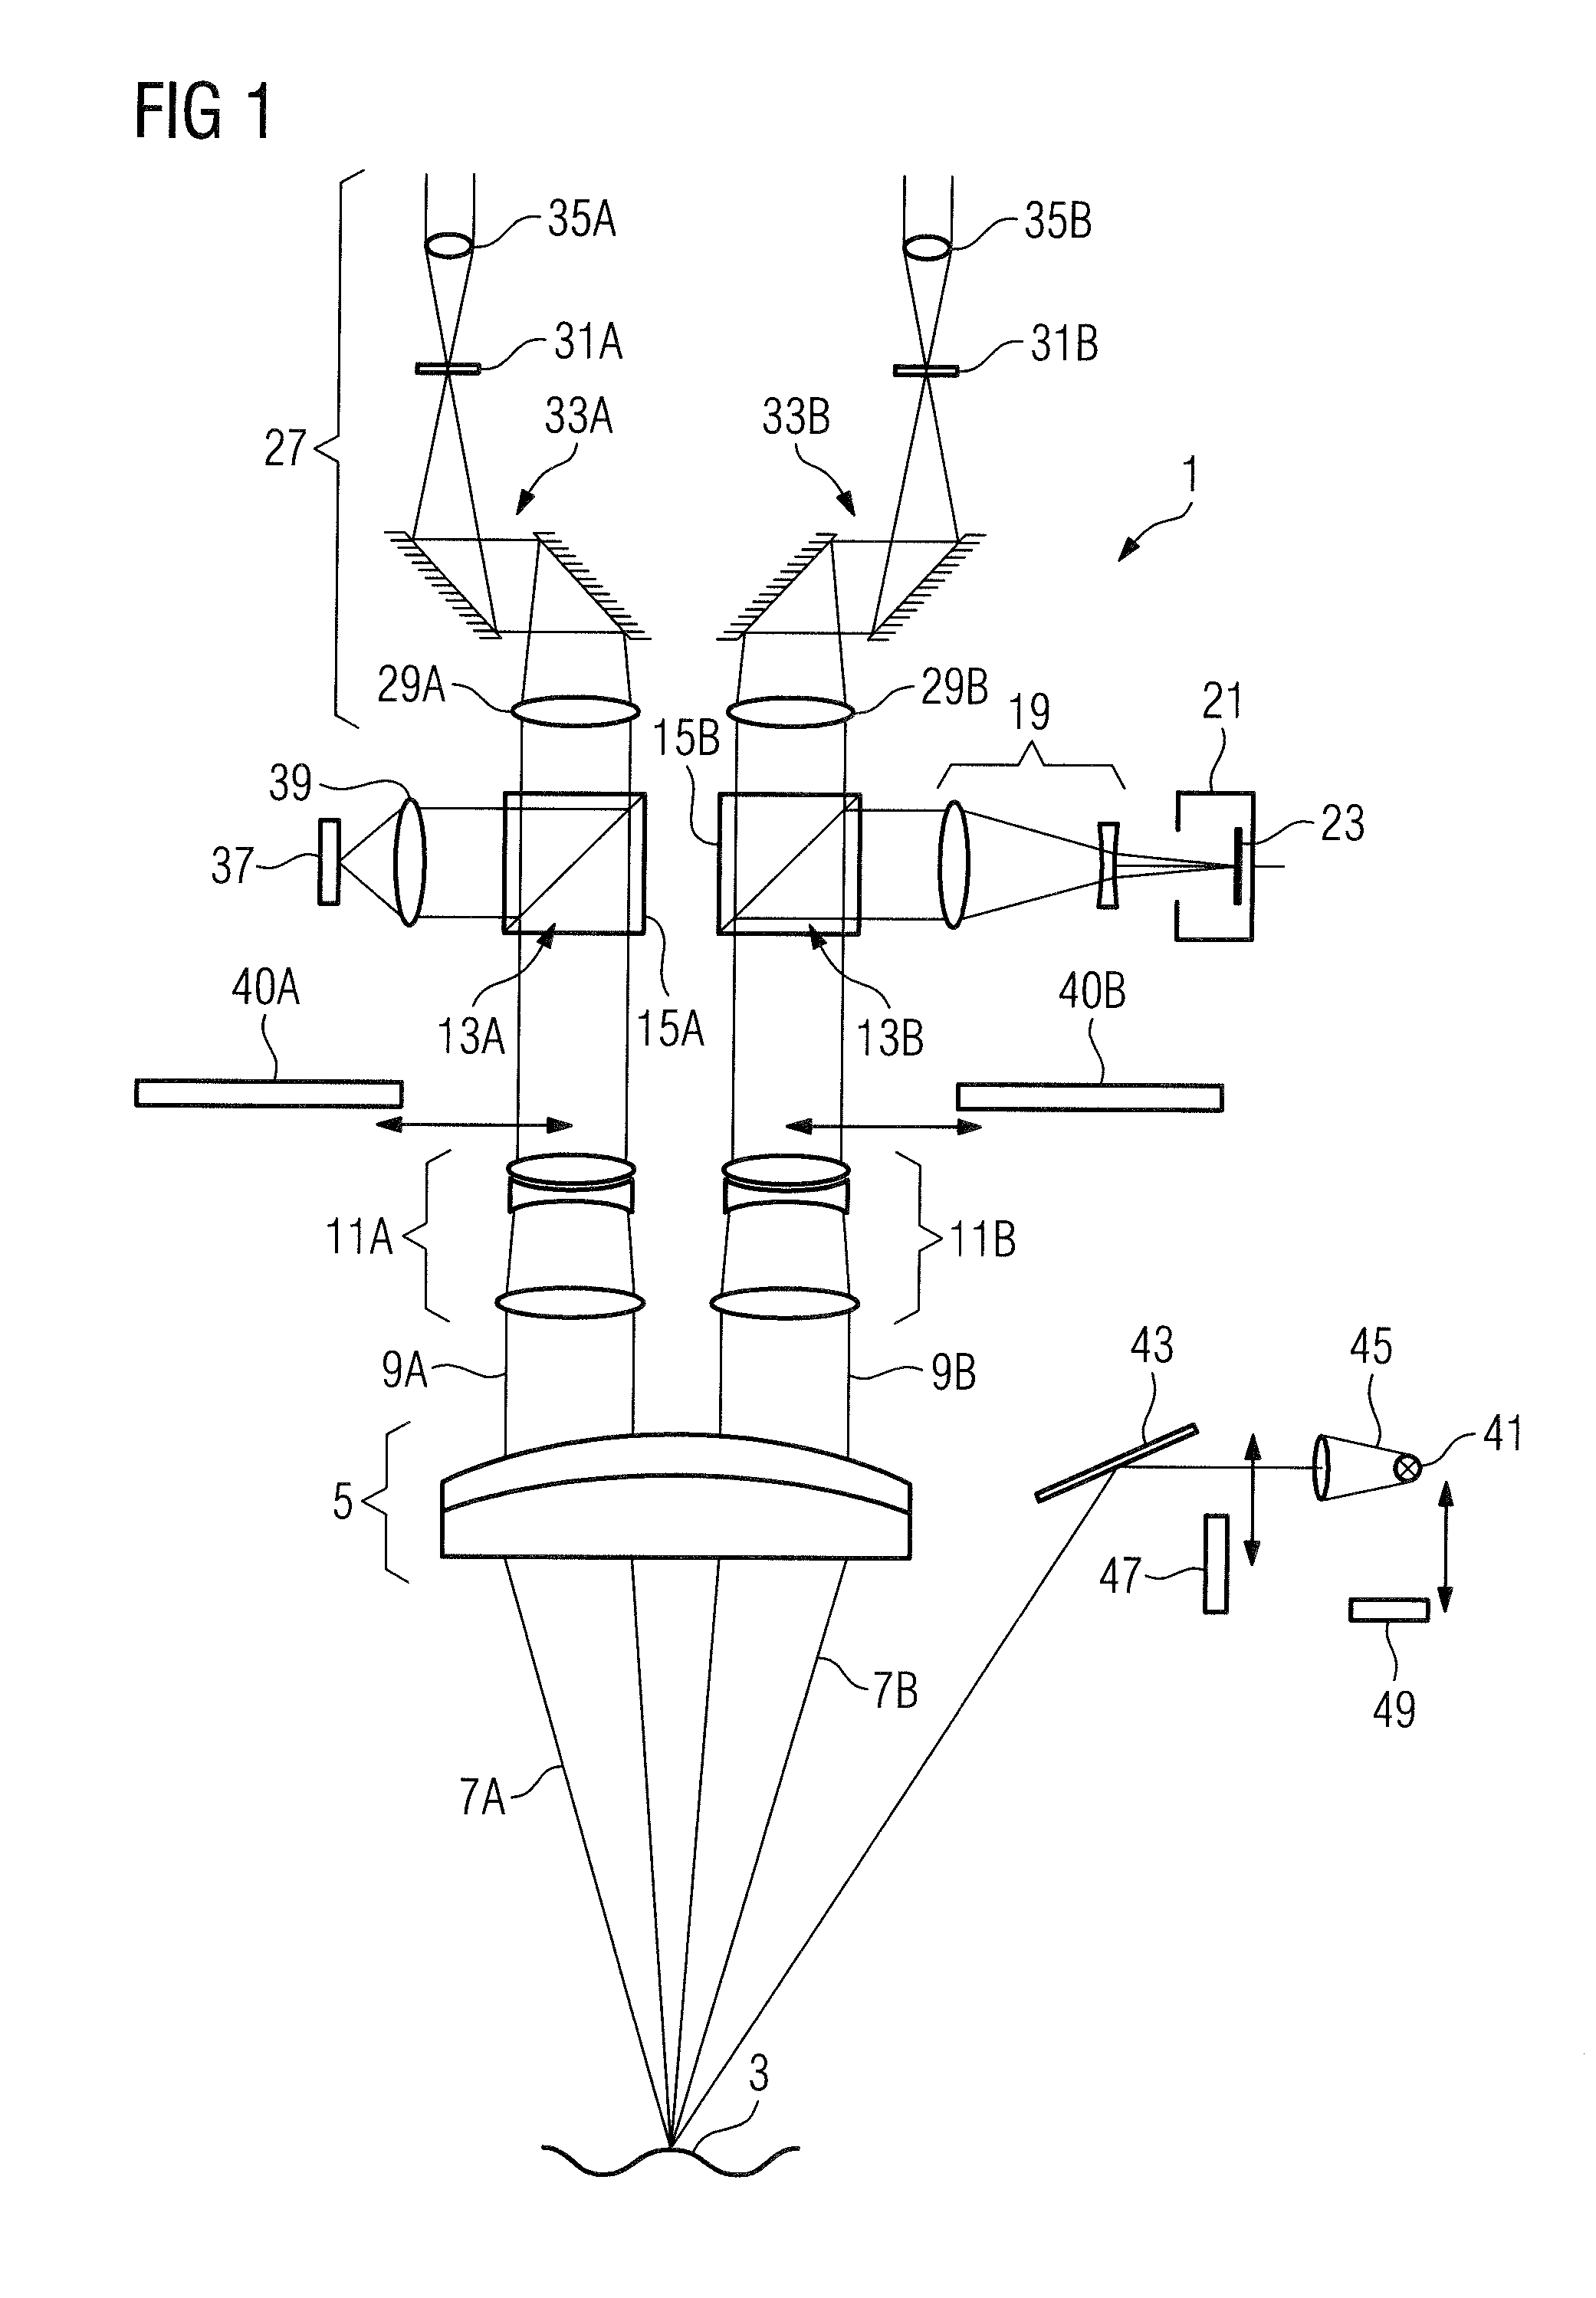 Stereomicroscope having a main observer beam path and a co-observer beam path